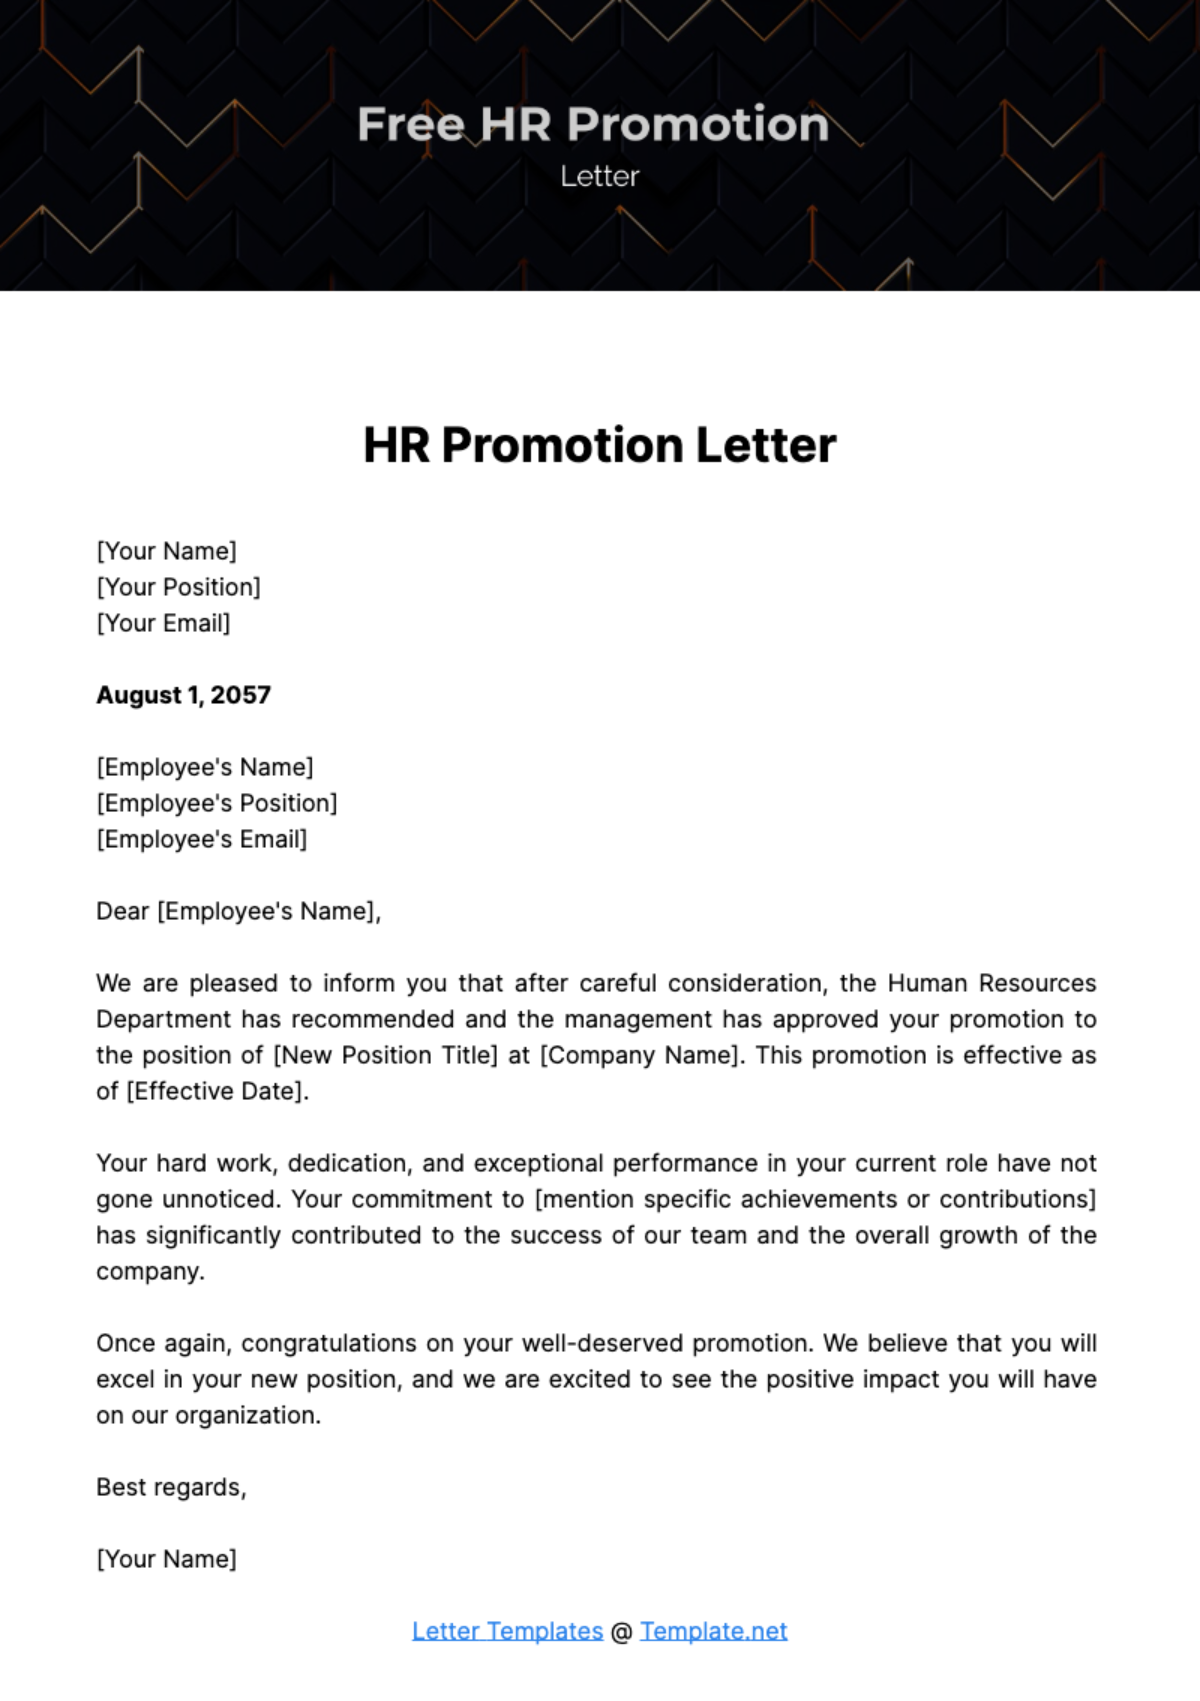 Free HR Promotion Letter Template